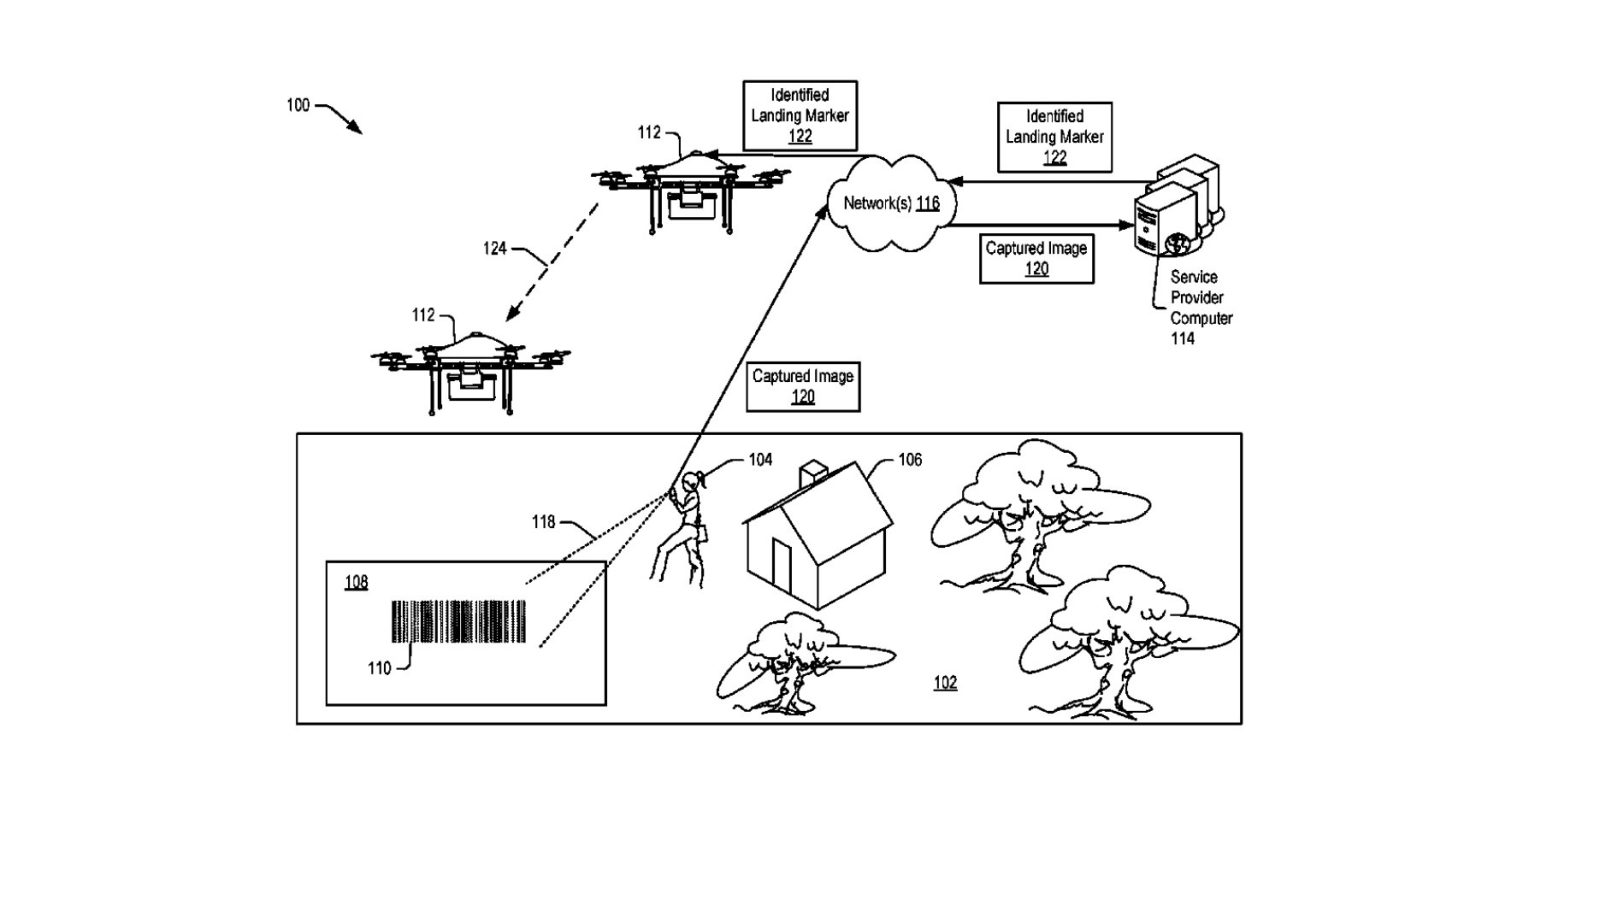 Amazon's "Drone Marker and Landing Zone Verification" patent approved